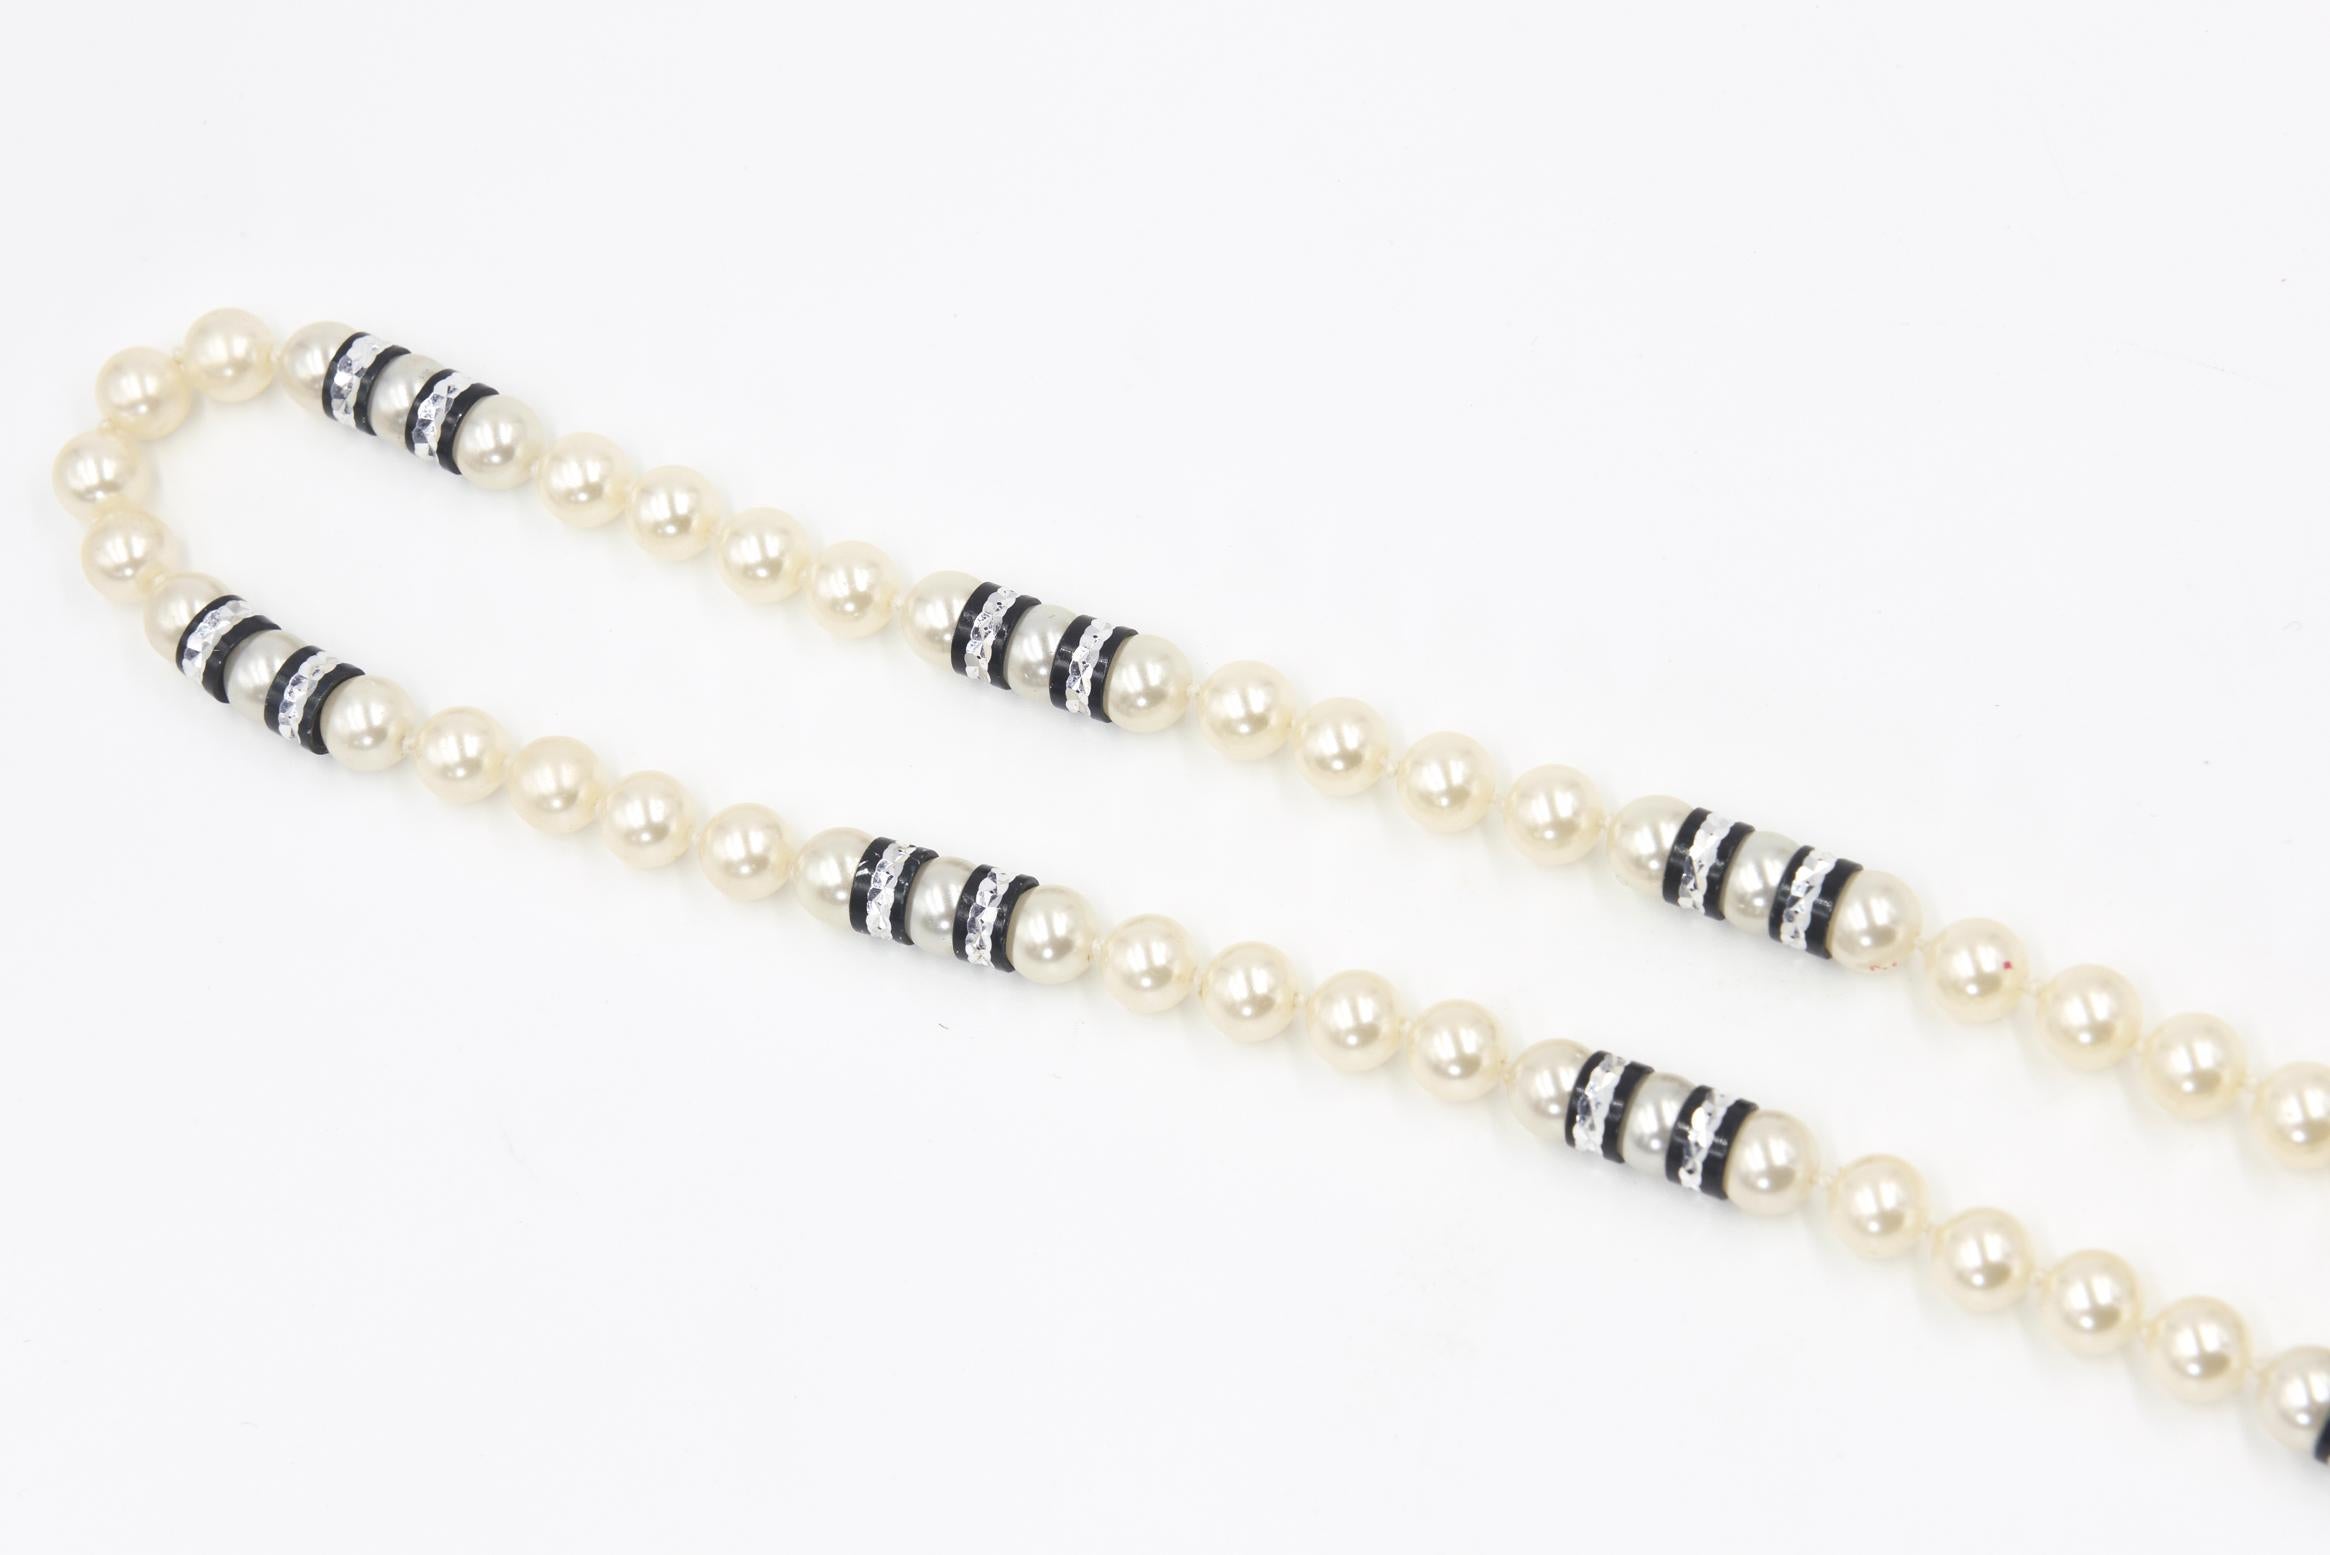 Art Deco Style Long Pearl Necklace with Black Tassels 1